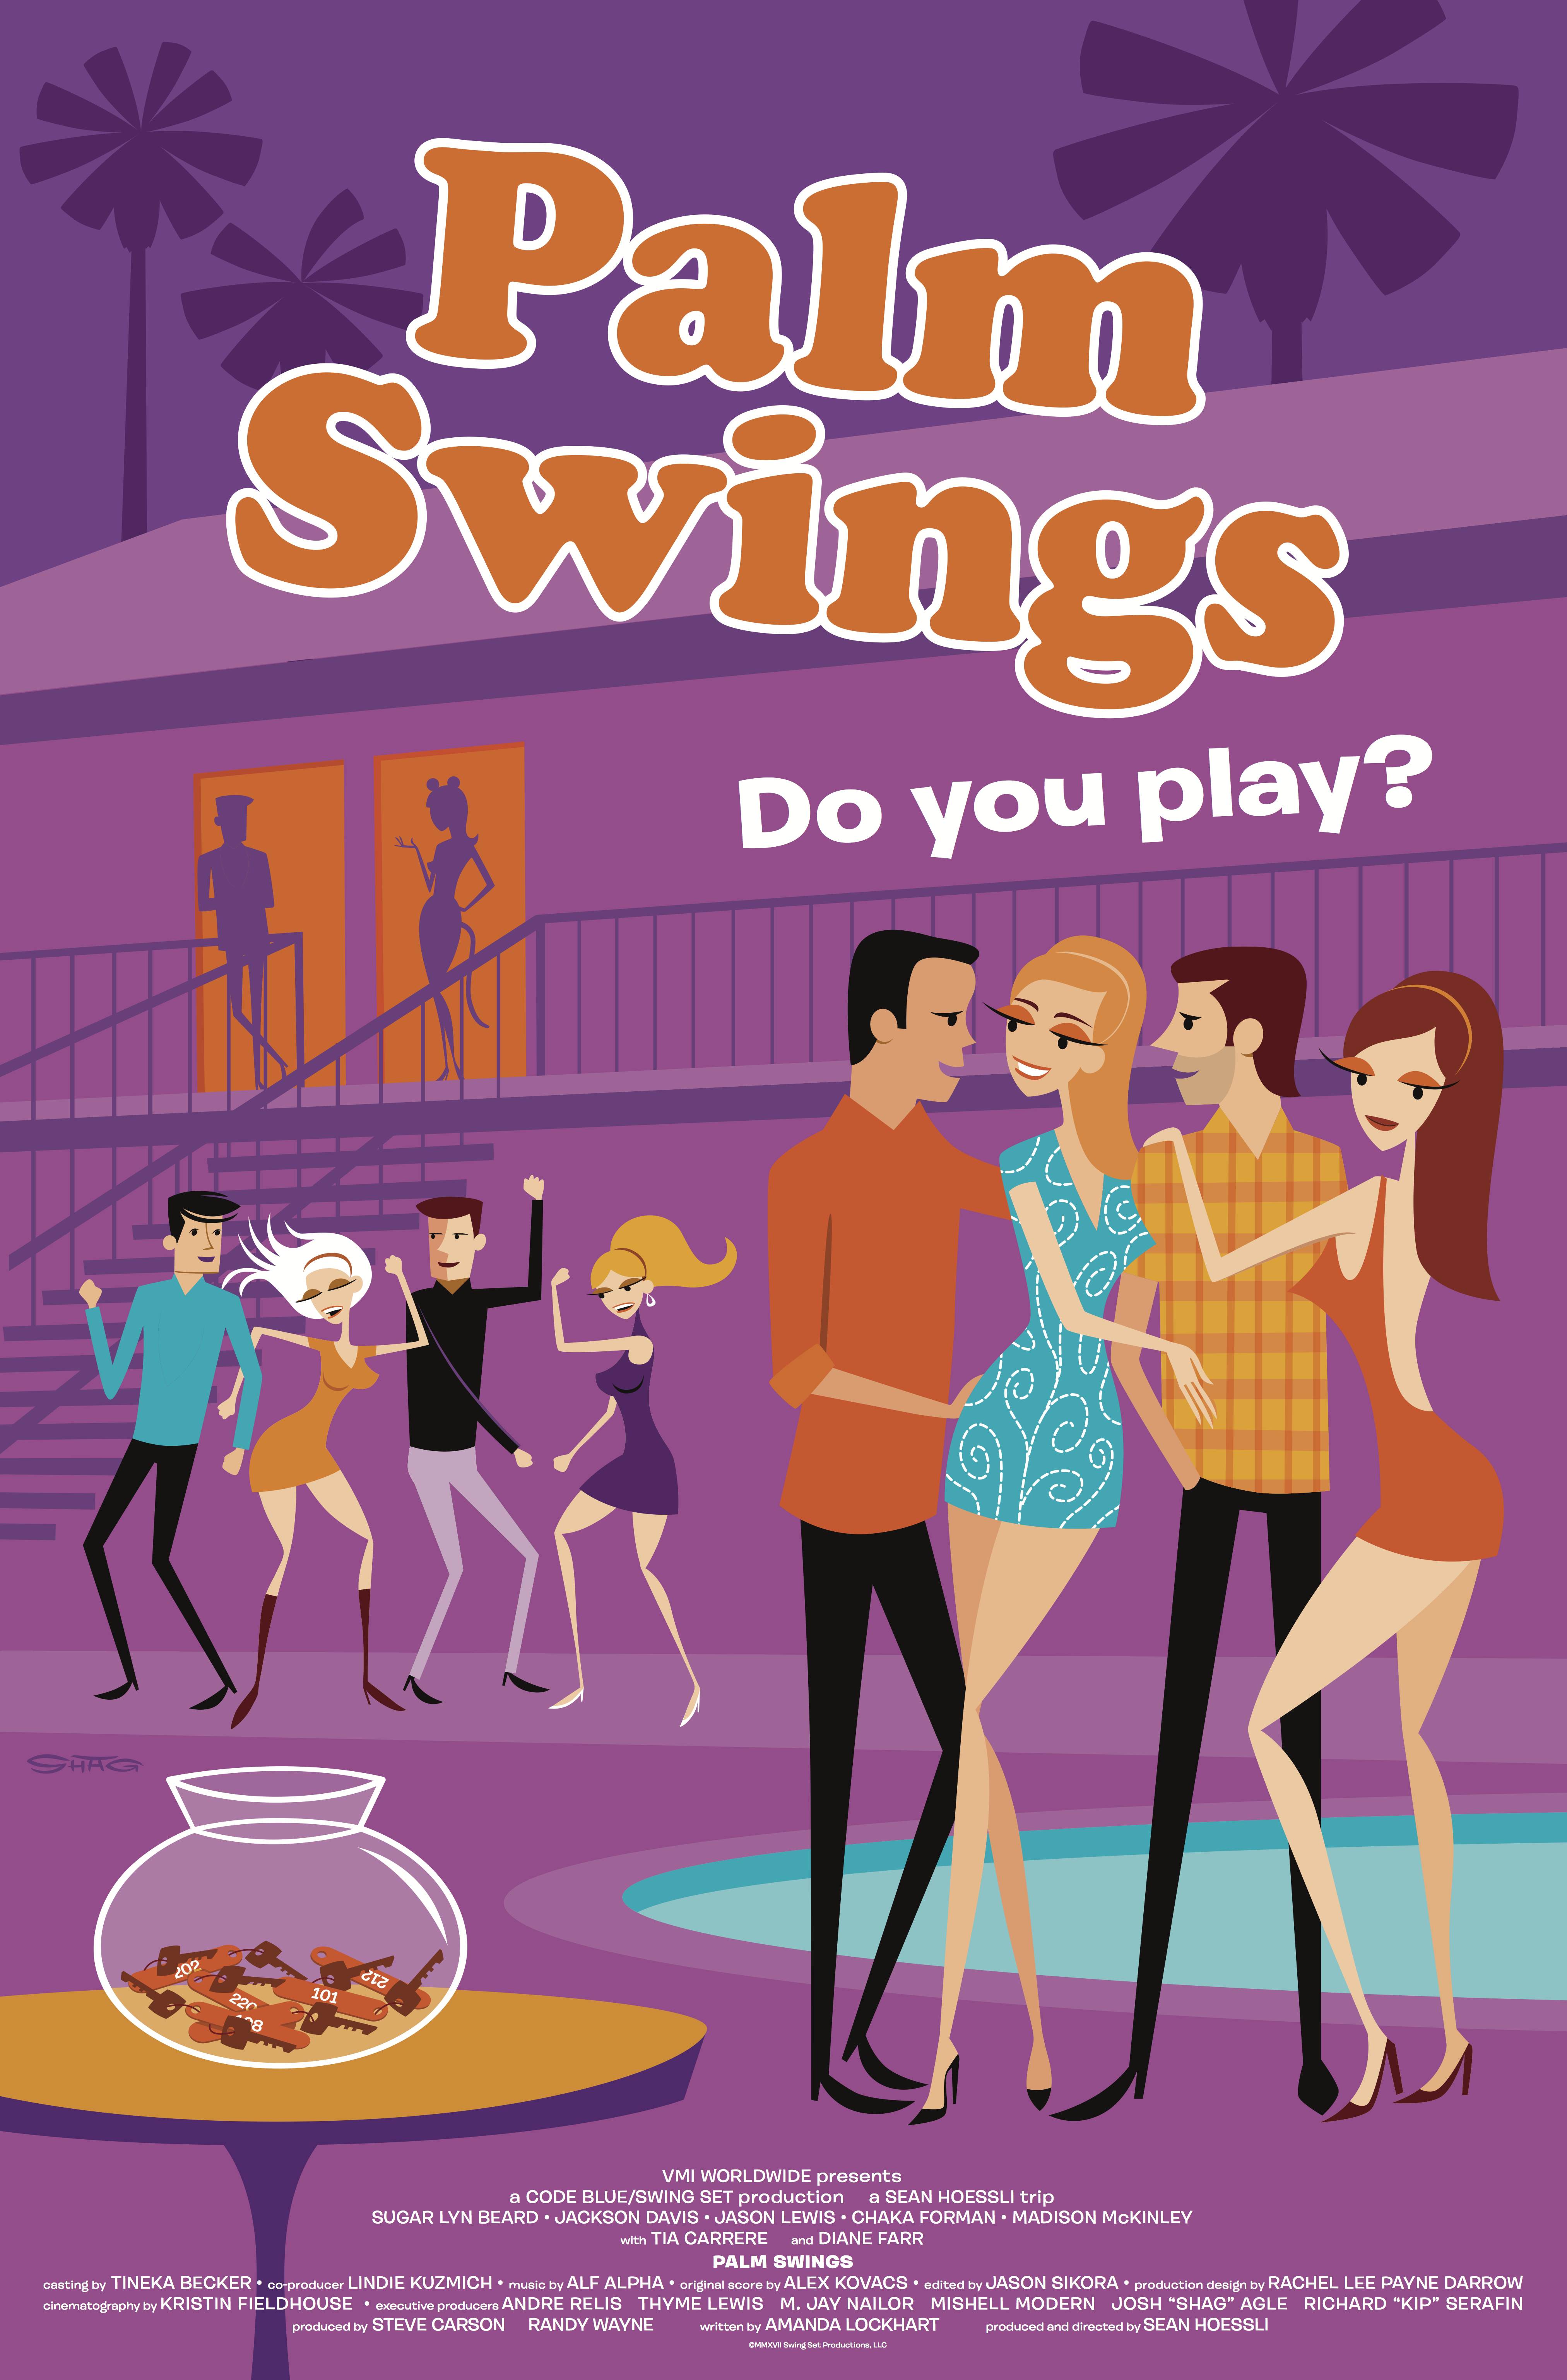 alan wrobel recommends Swingers In Palm Springs